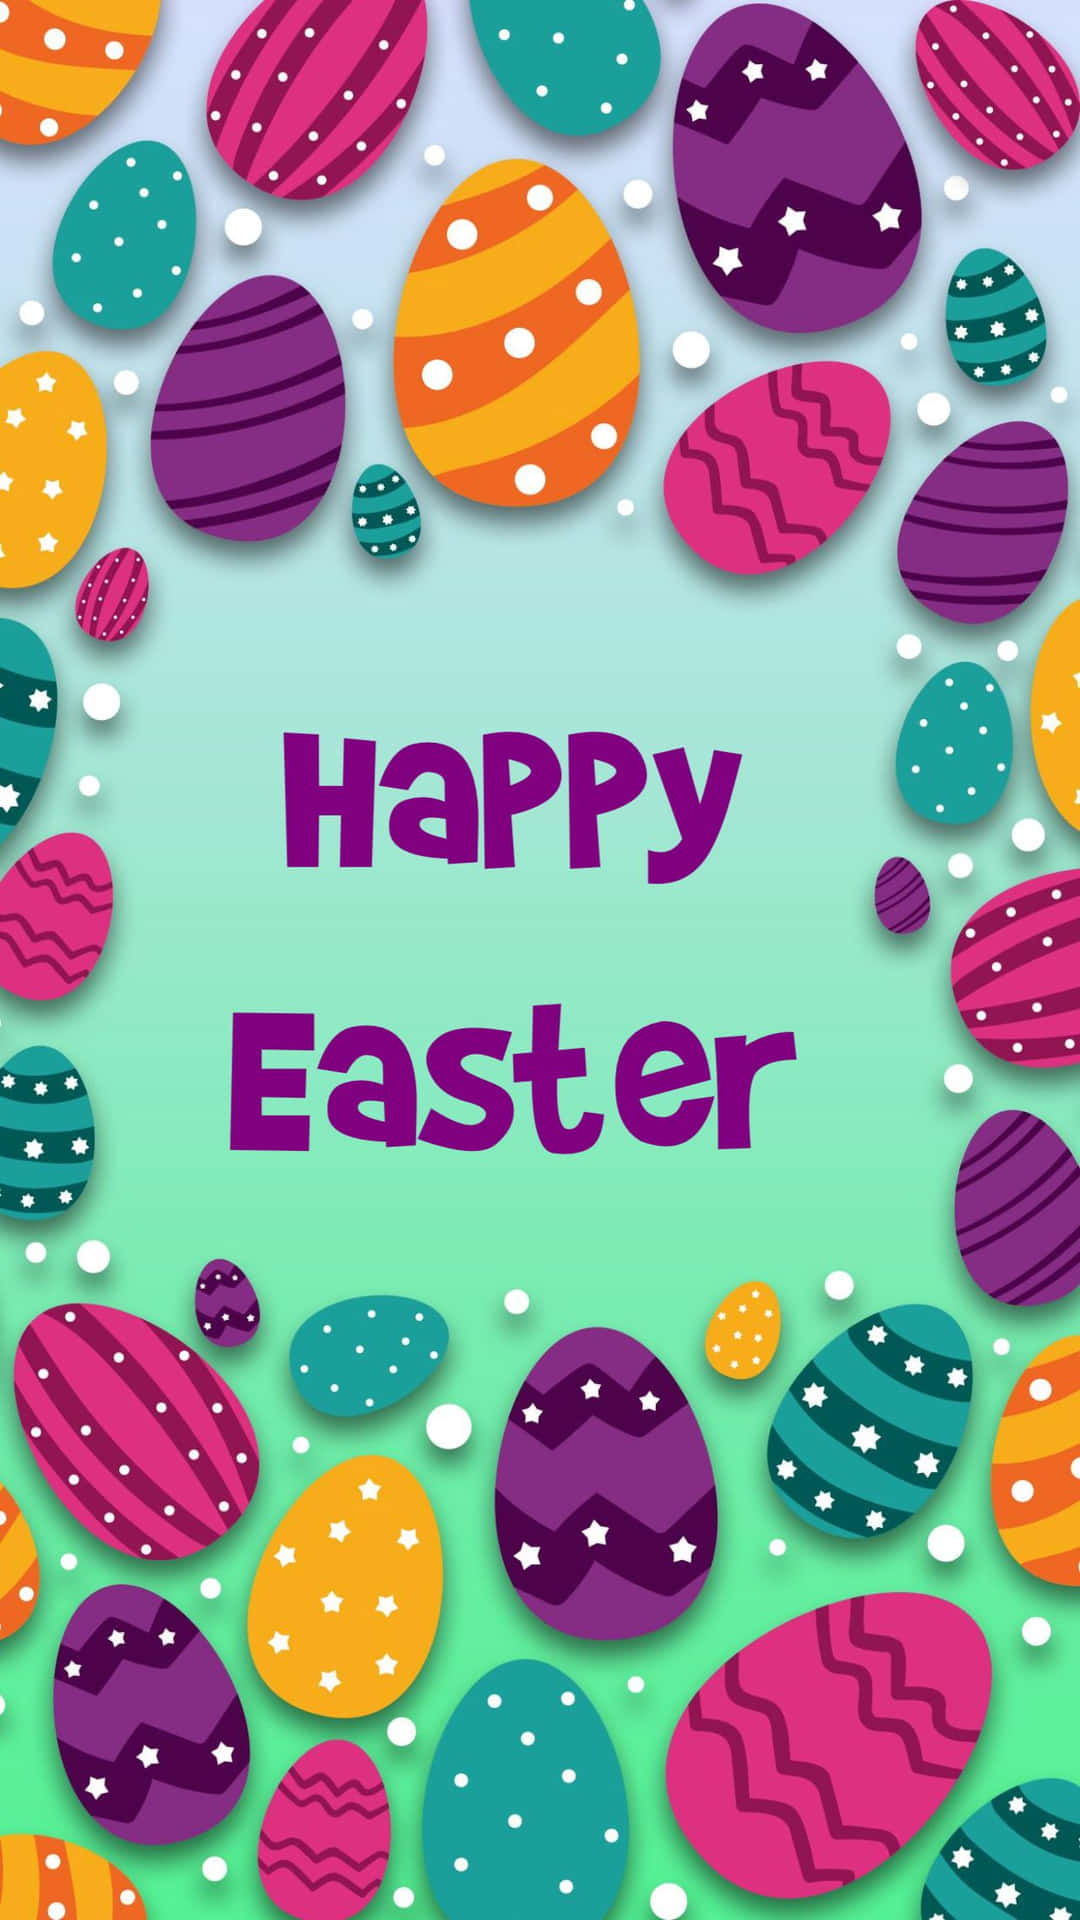 Wishing you a blessed and happy Easter! Wallpaper